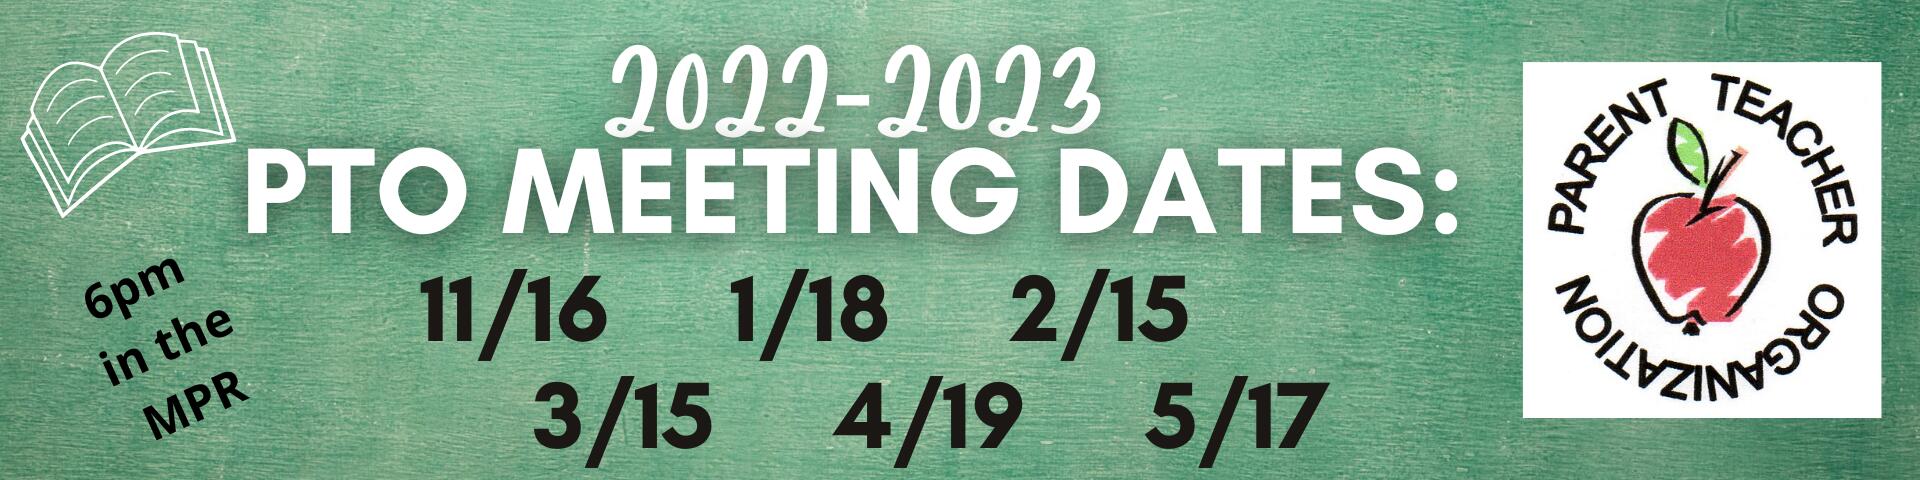 parent teacher organization meeting dates for the rest of the year, january 18, february 15, march 15, april 19, may 17